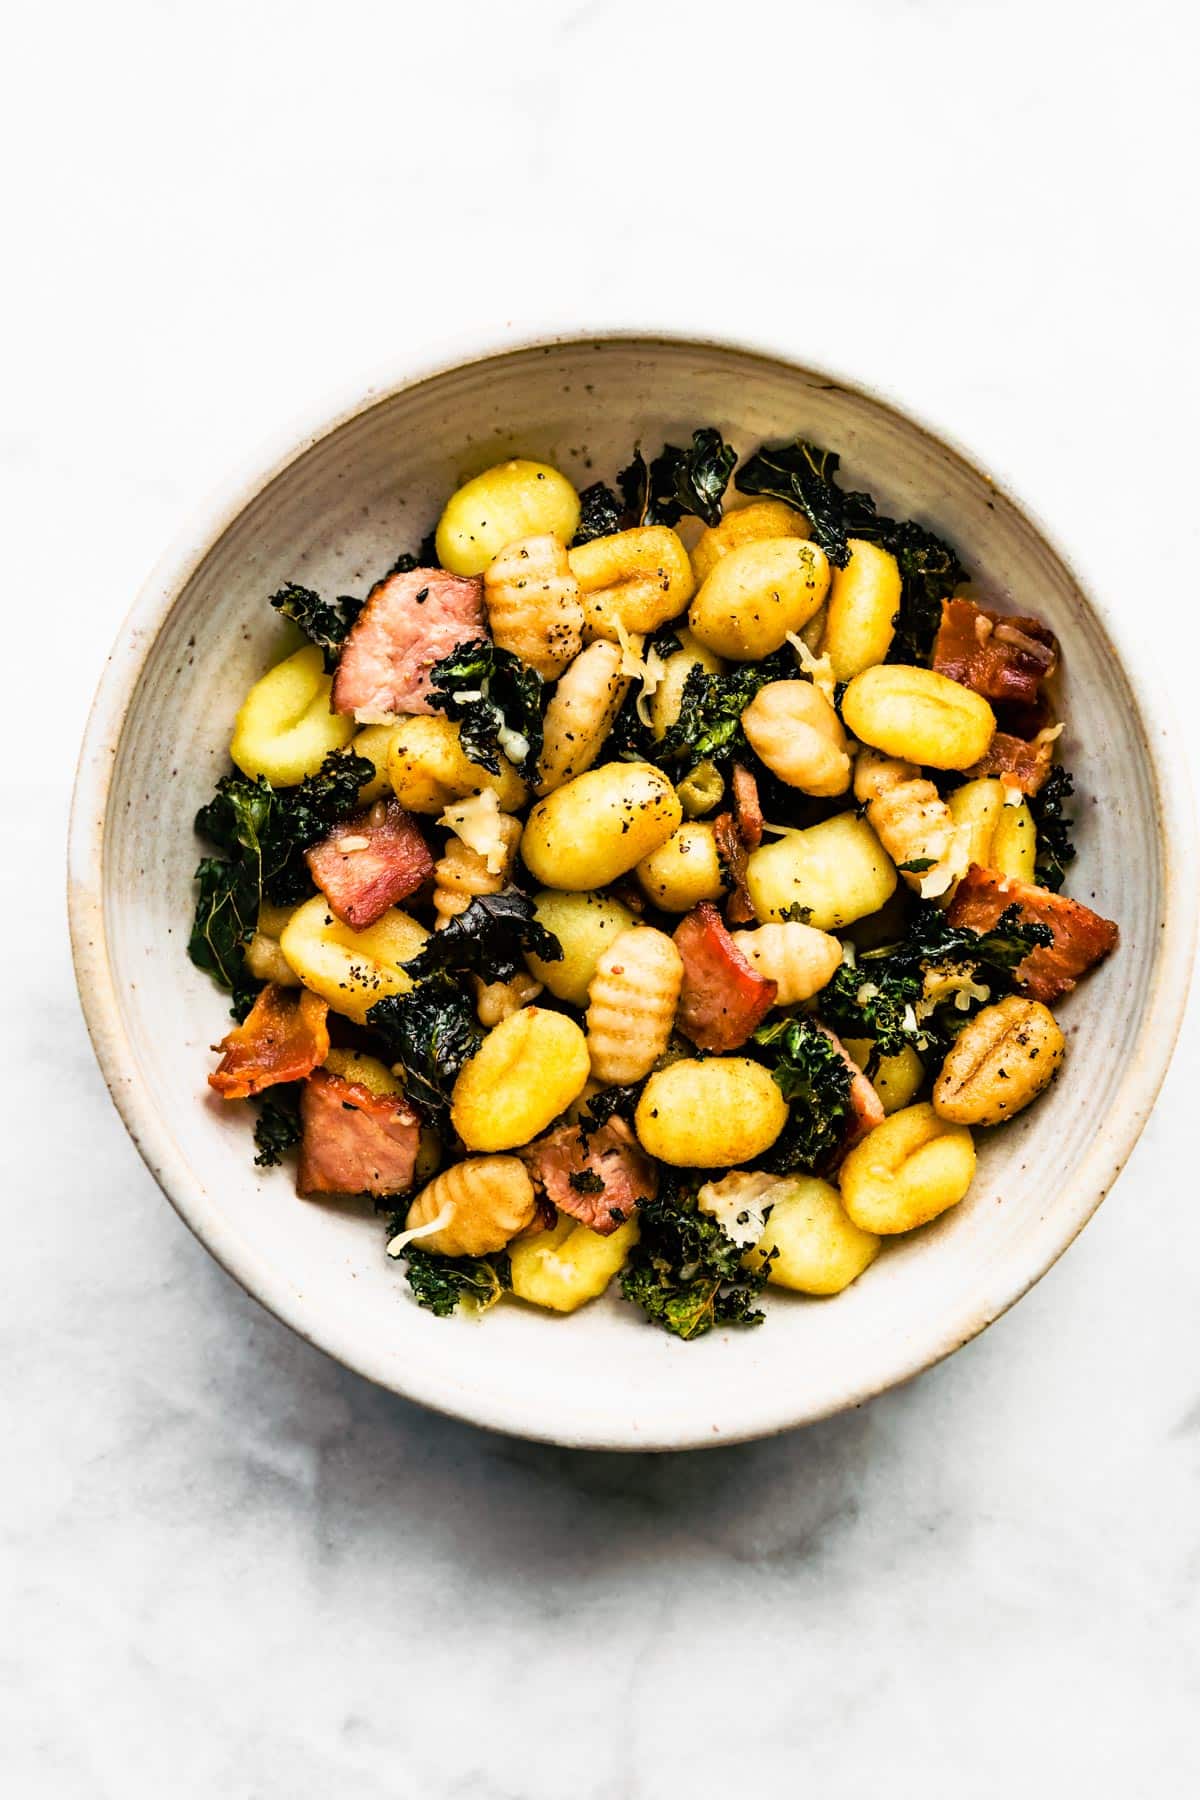 A bowl of gluten-free baked gnocchi with kale, bacon, and cheese.